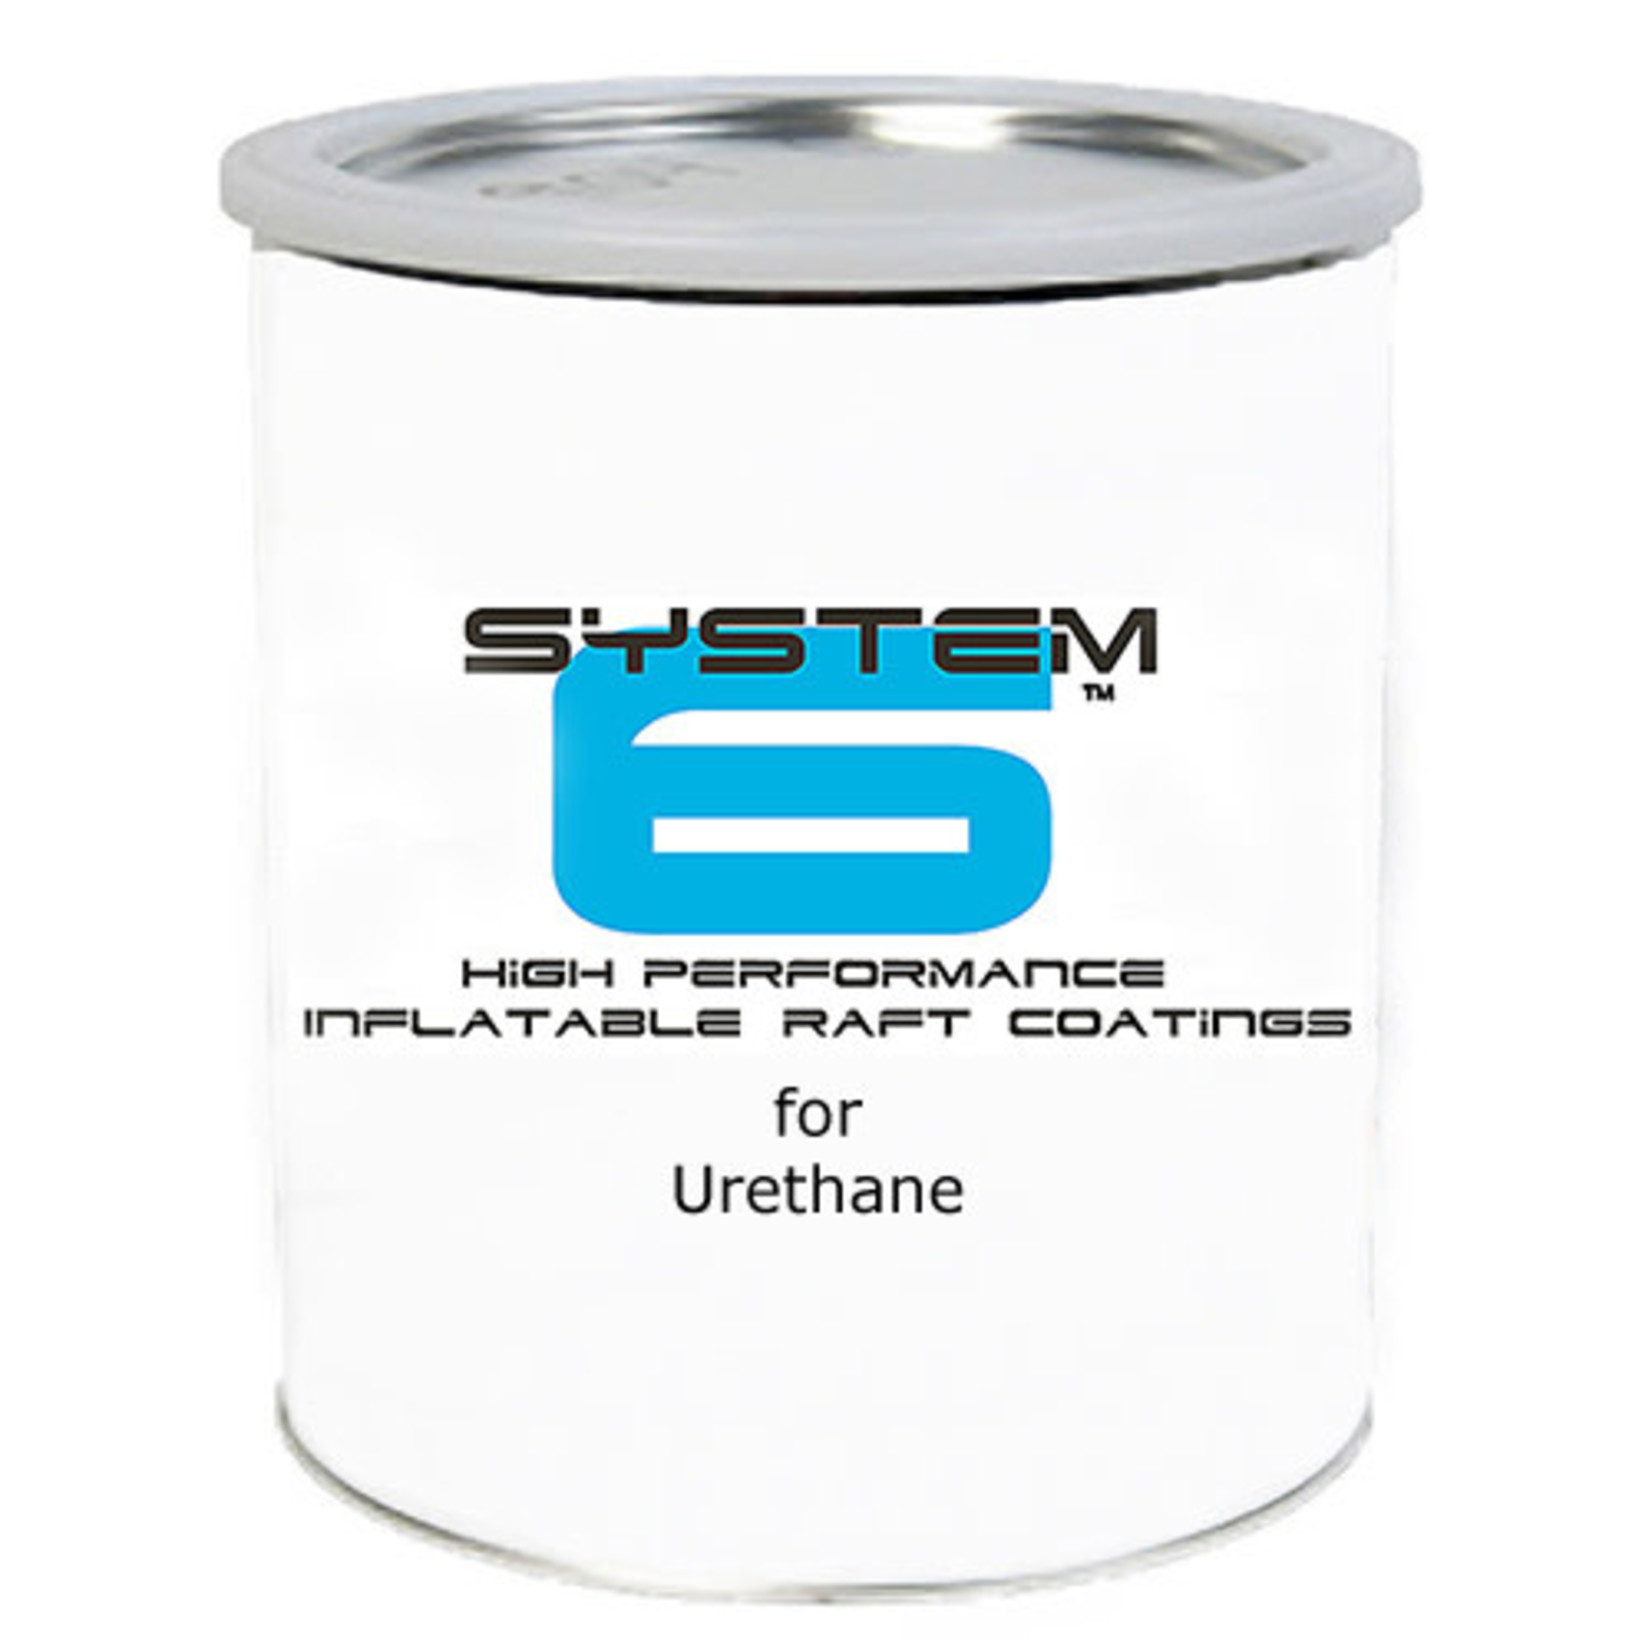 Man of Rubber System 6 Urethane Coating for Urethane Rafts & Inflatable Boats